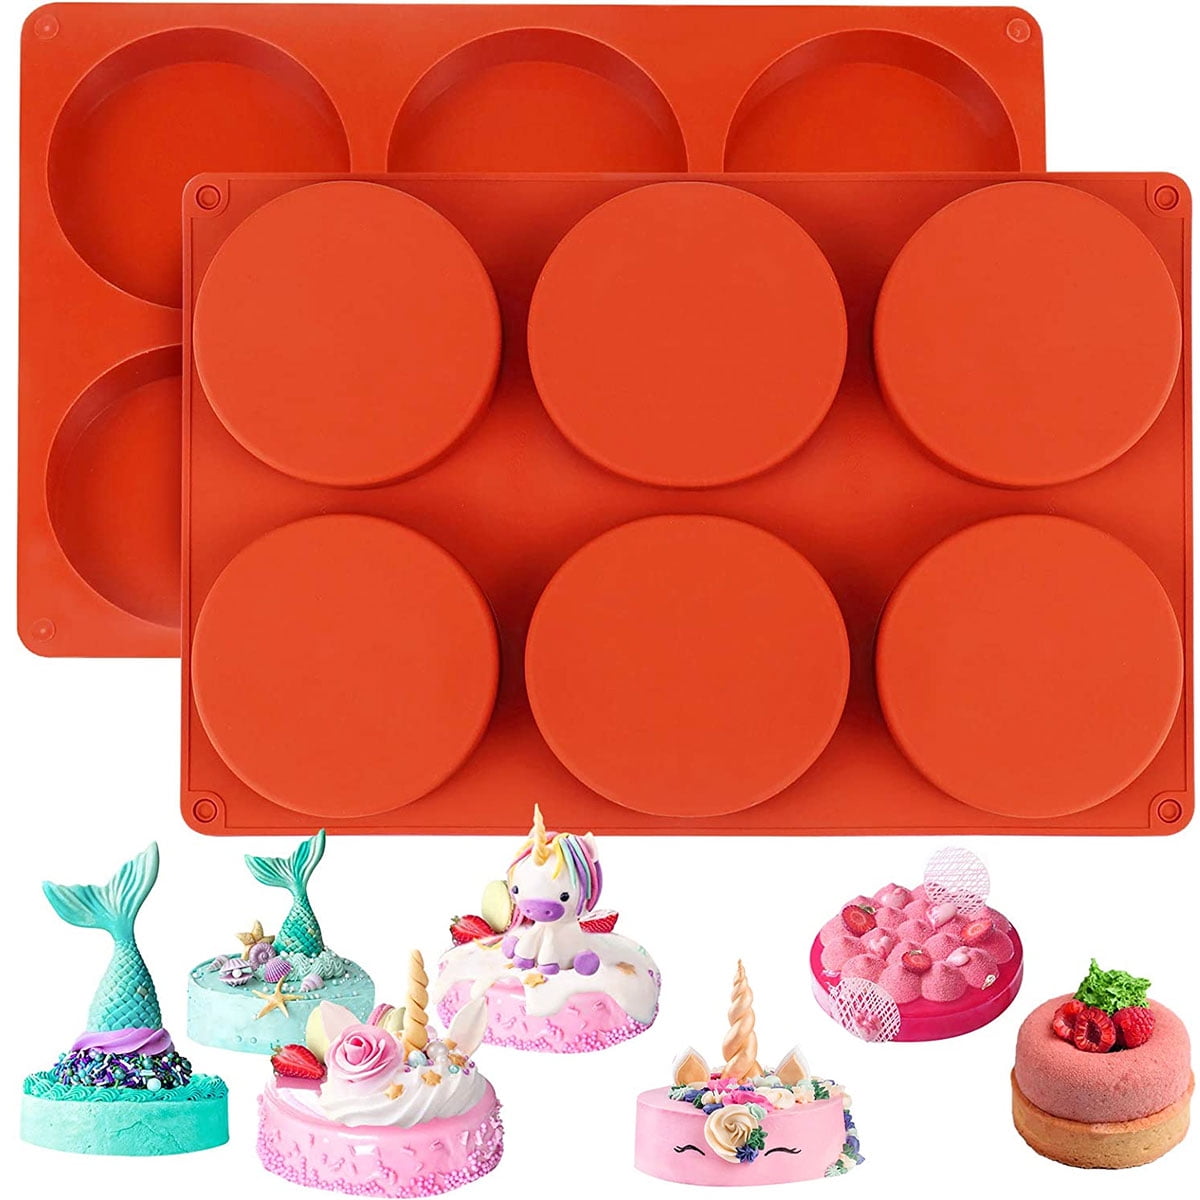 Megrocle 8 Cavity Silicone Egg Molds Set of 2, Food Grade Silicone Mold for  Cake Decorating, Chocolate Mold, Candy Mold, Ice Cube Trays, Muffin